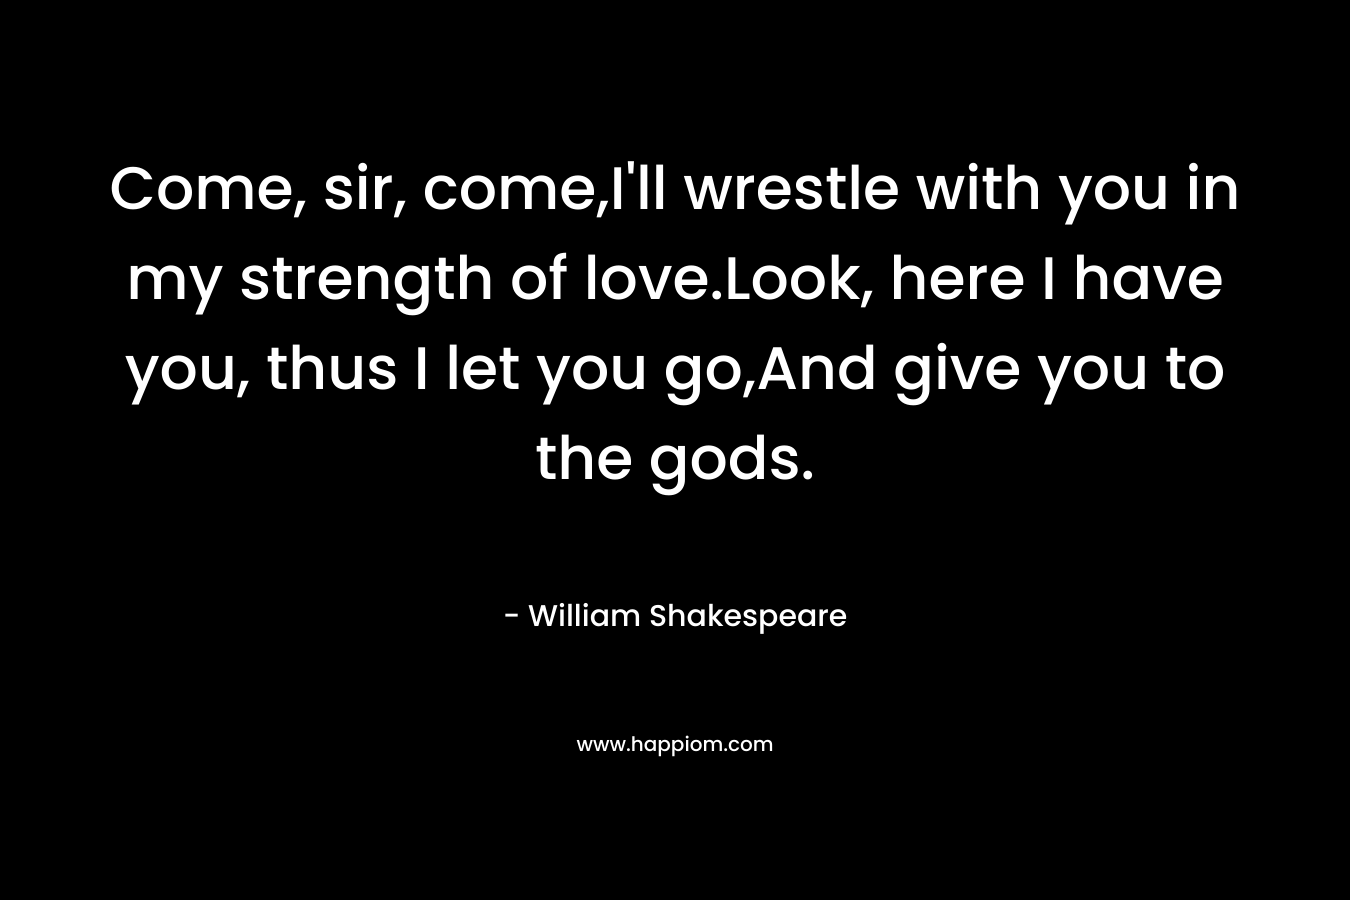 Come, sir, come,I’ll wrestle with you in my strength of love.Look, here I have you, thus I let you go,And give you to the gods. – William Shakespeare